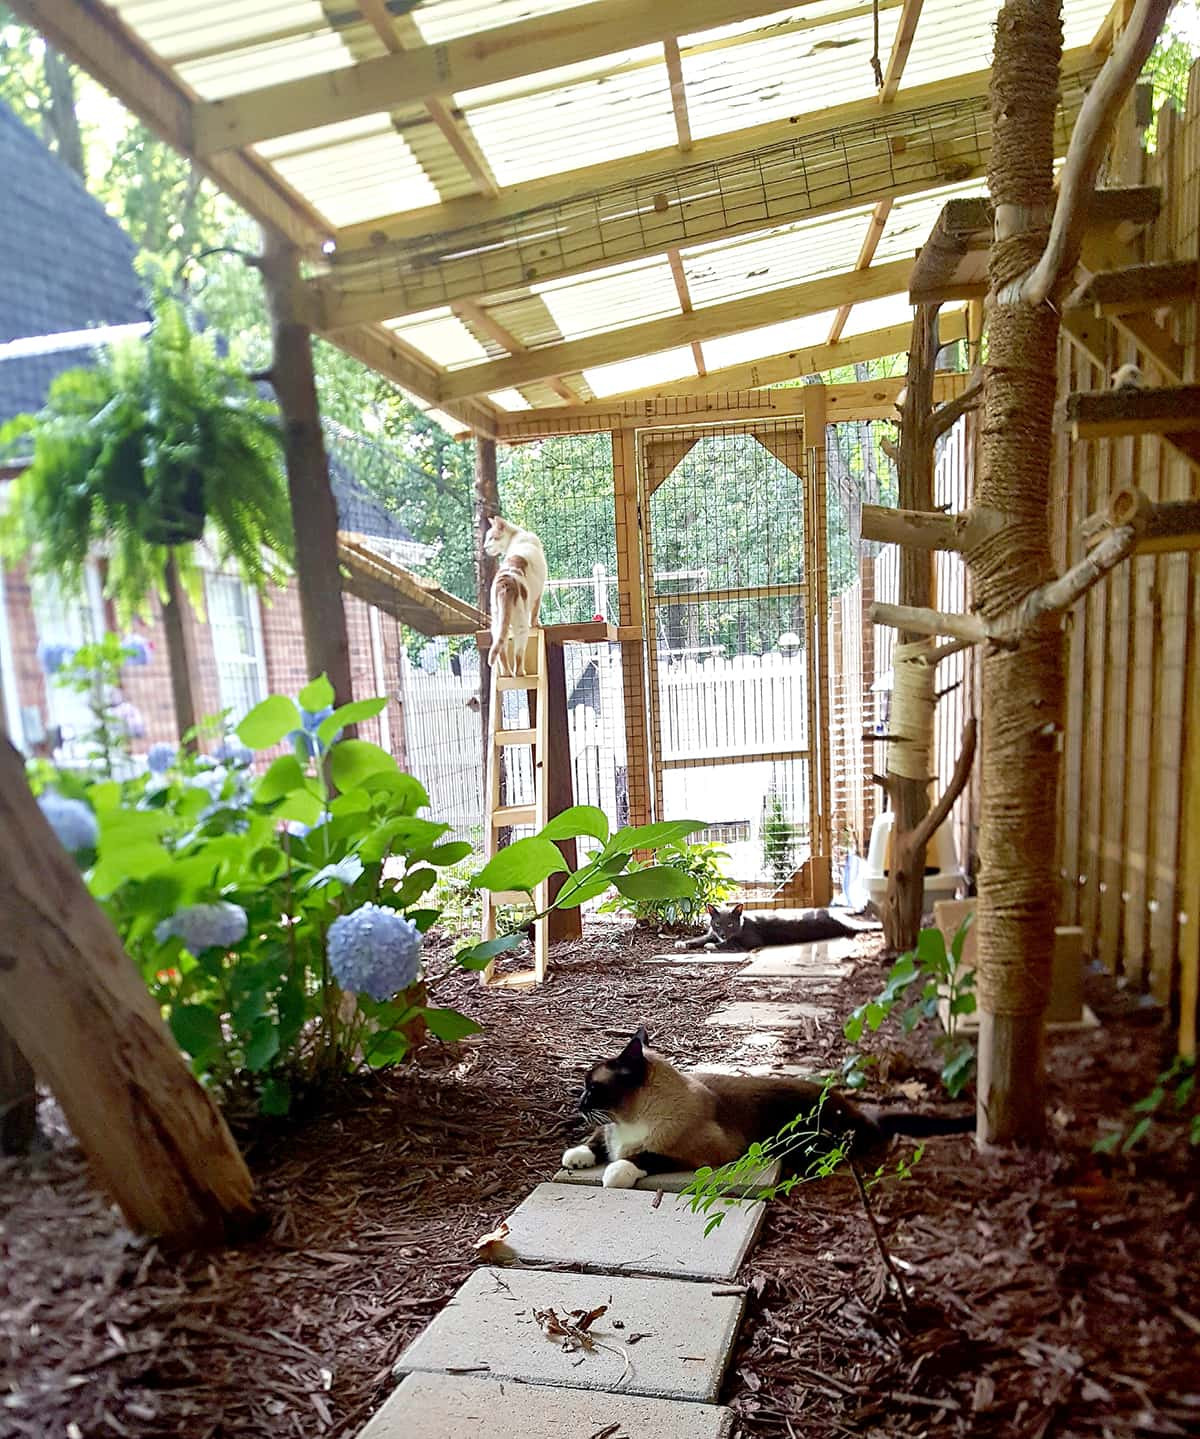 DIY Cat Outdoor Enclosures
 Connected outside cat enclosures with an enclosed tree